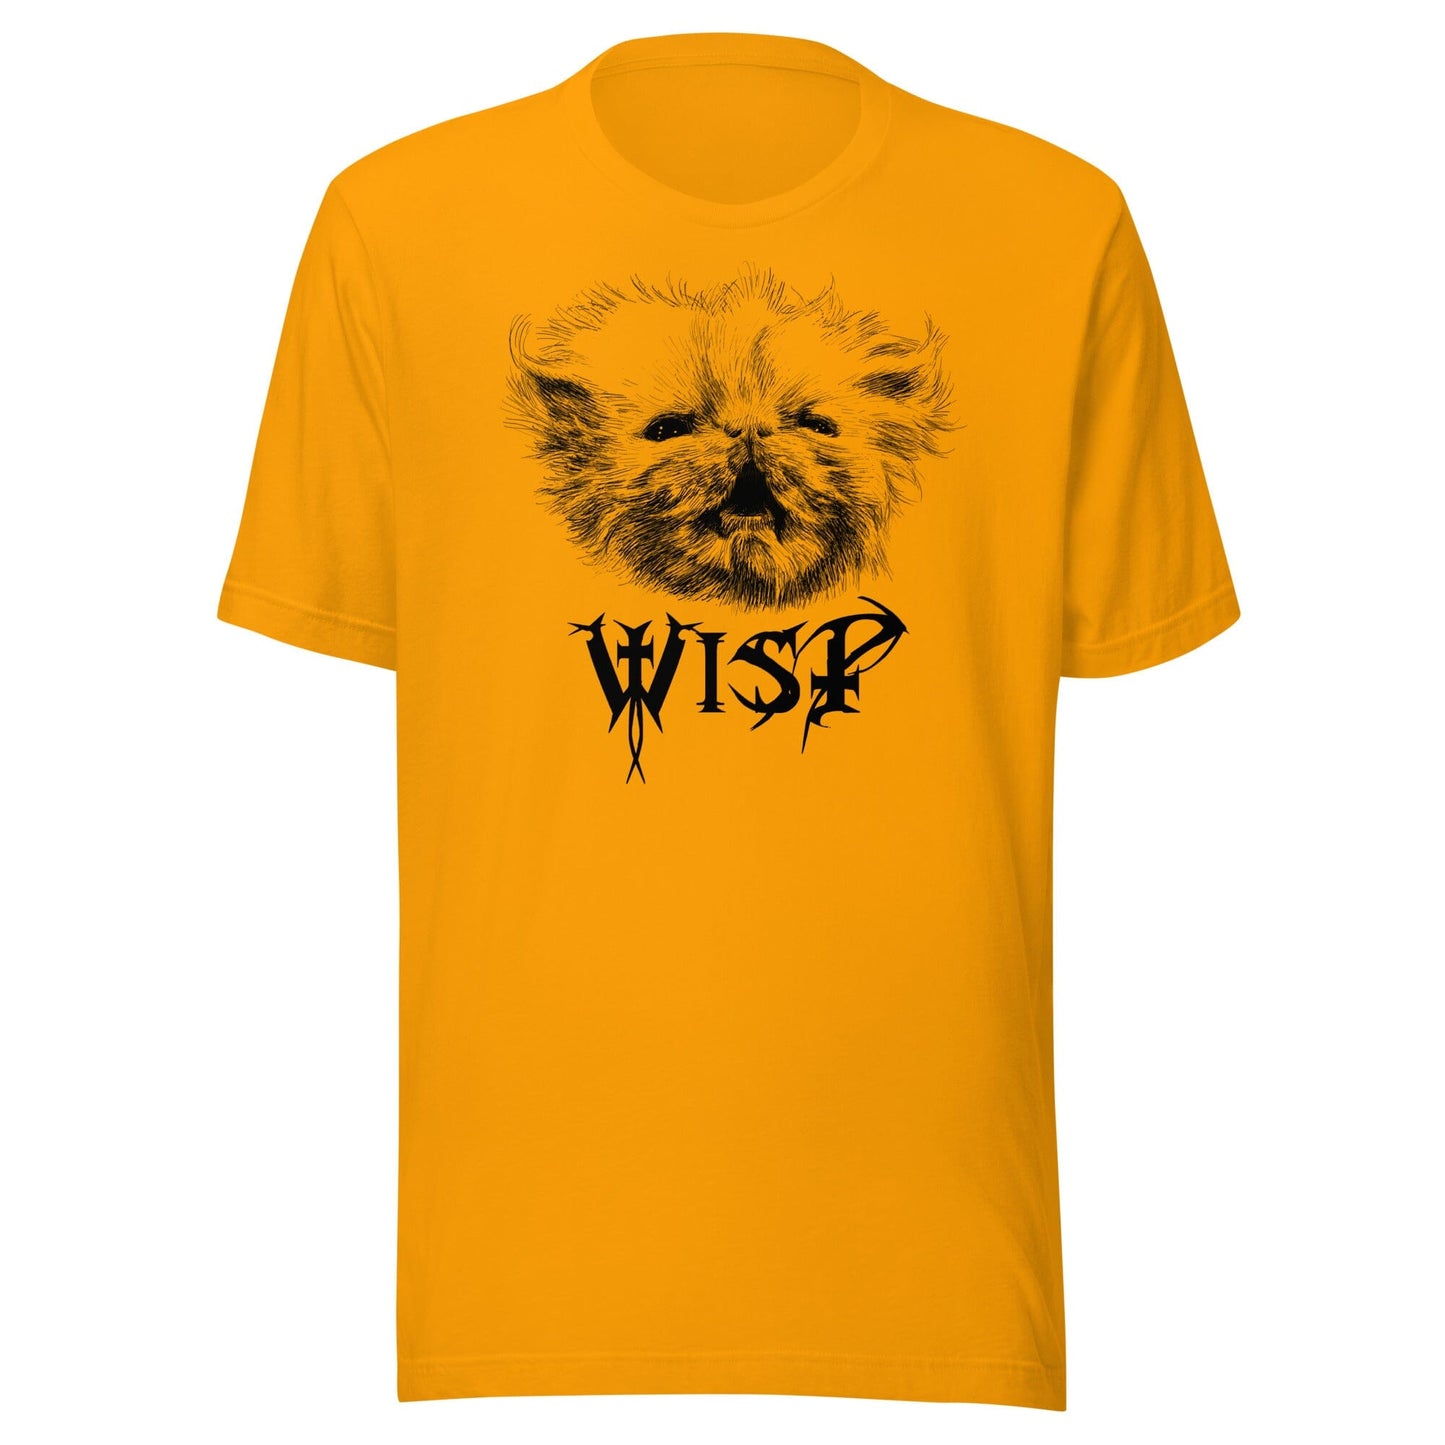 Metal Wisp T-Shirt [Unfoiled] (All net proceeds go to Rags to Riches Animal Rescue) JoyousJoyfulJoyness Gold S 